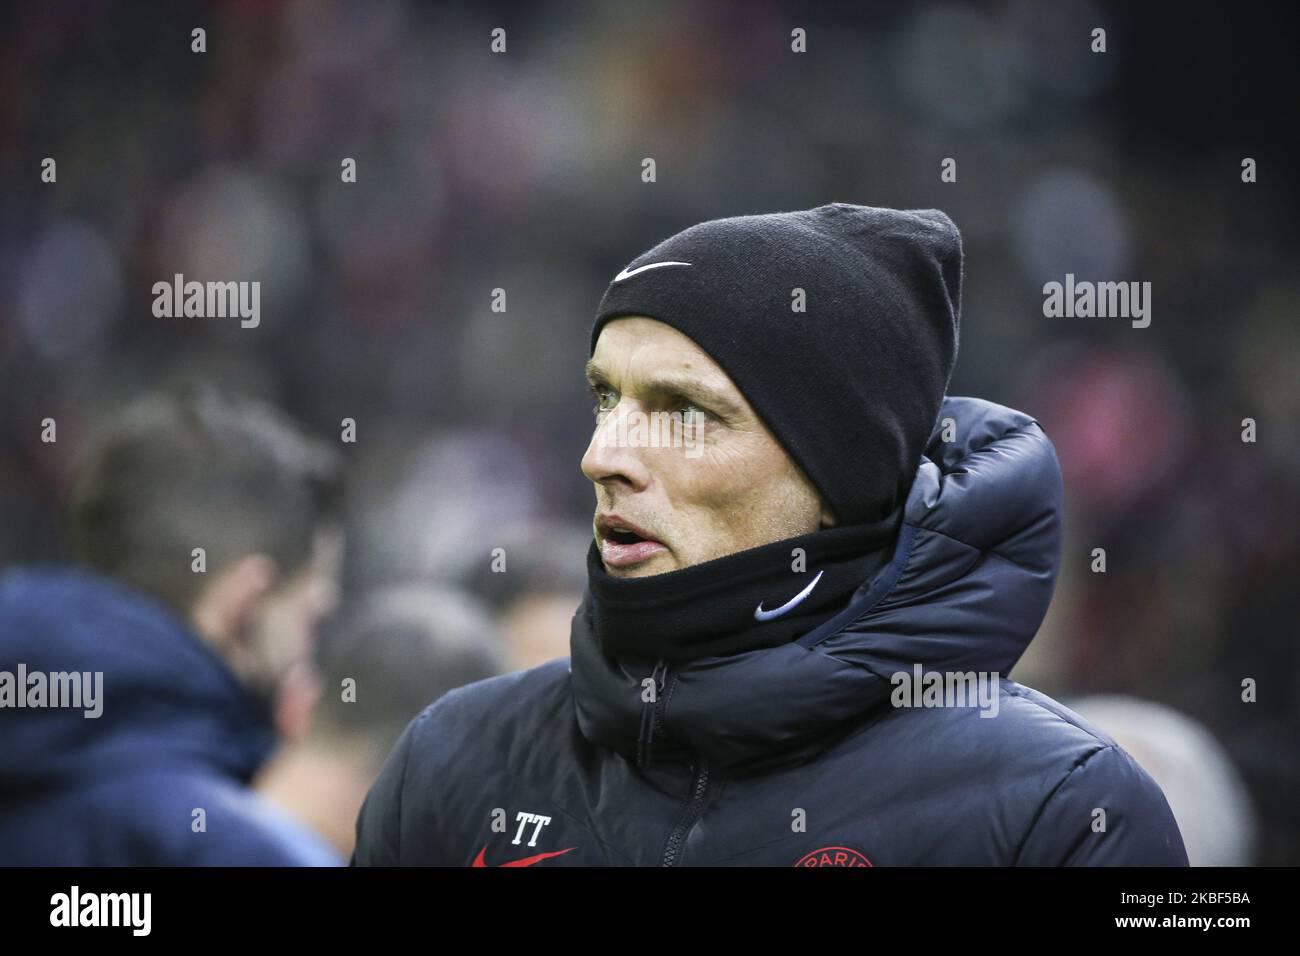 Thomas Tuchel during the French League Cup semi-final football match between Stade de Reims and Paris Saint-Germain at the Auguste Delaune Stadium in Reims on January 22, 2020. (Photo by Elyxandro Cegarra/NurPhoto) Stock Photo